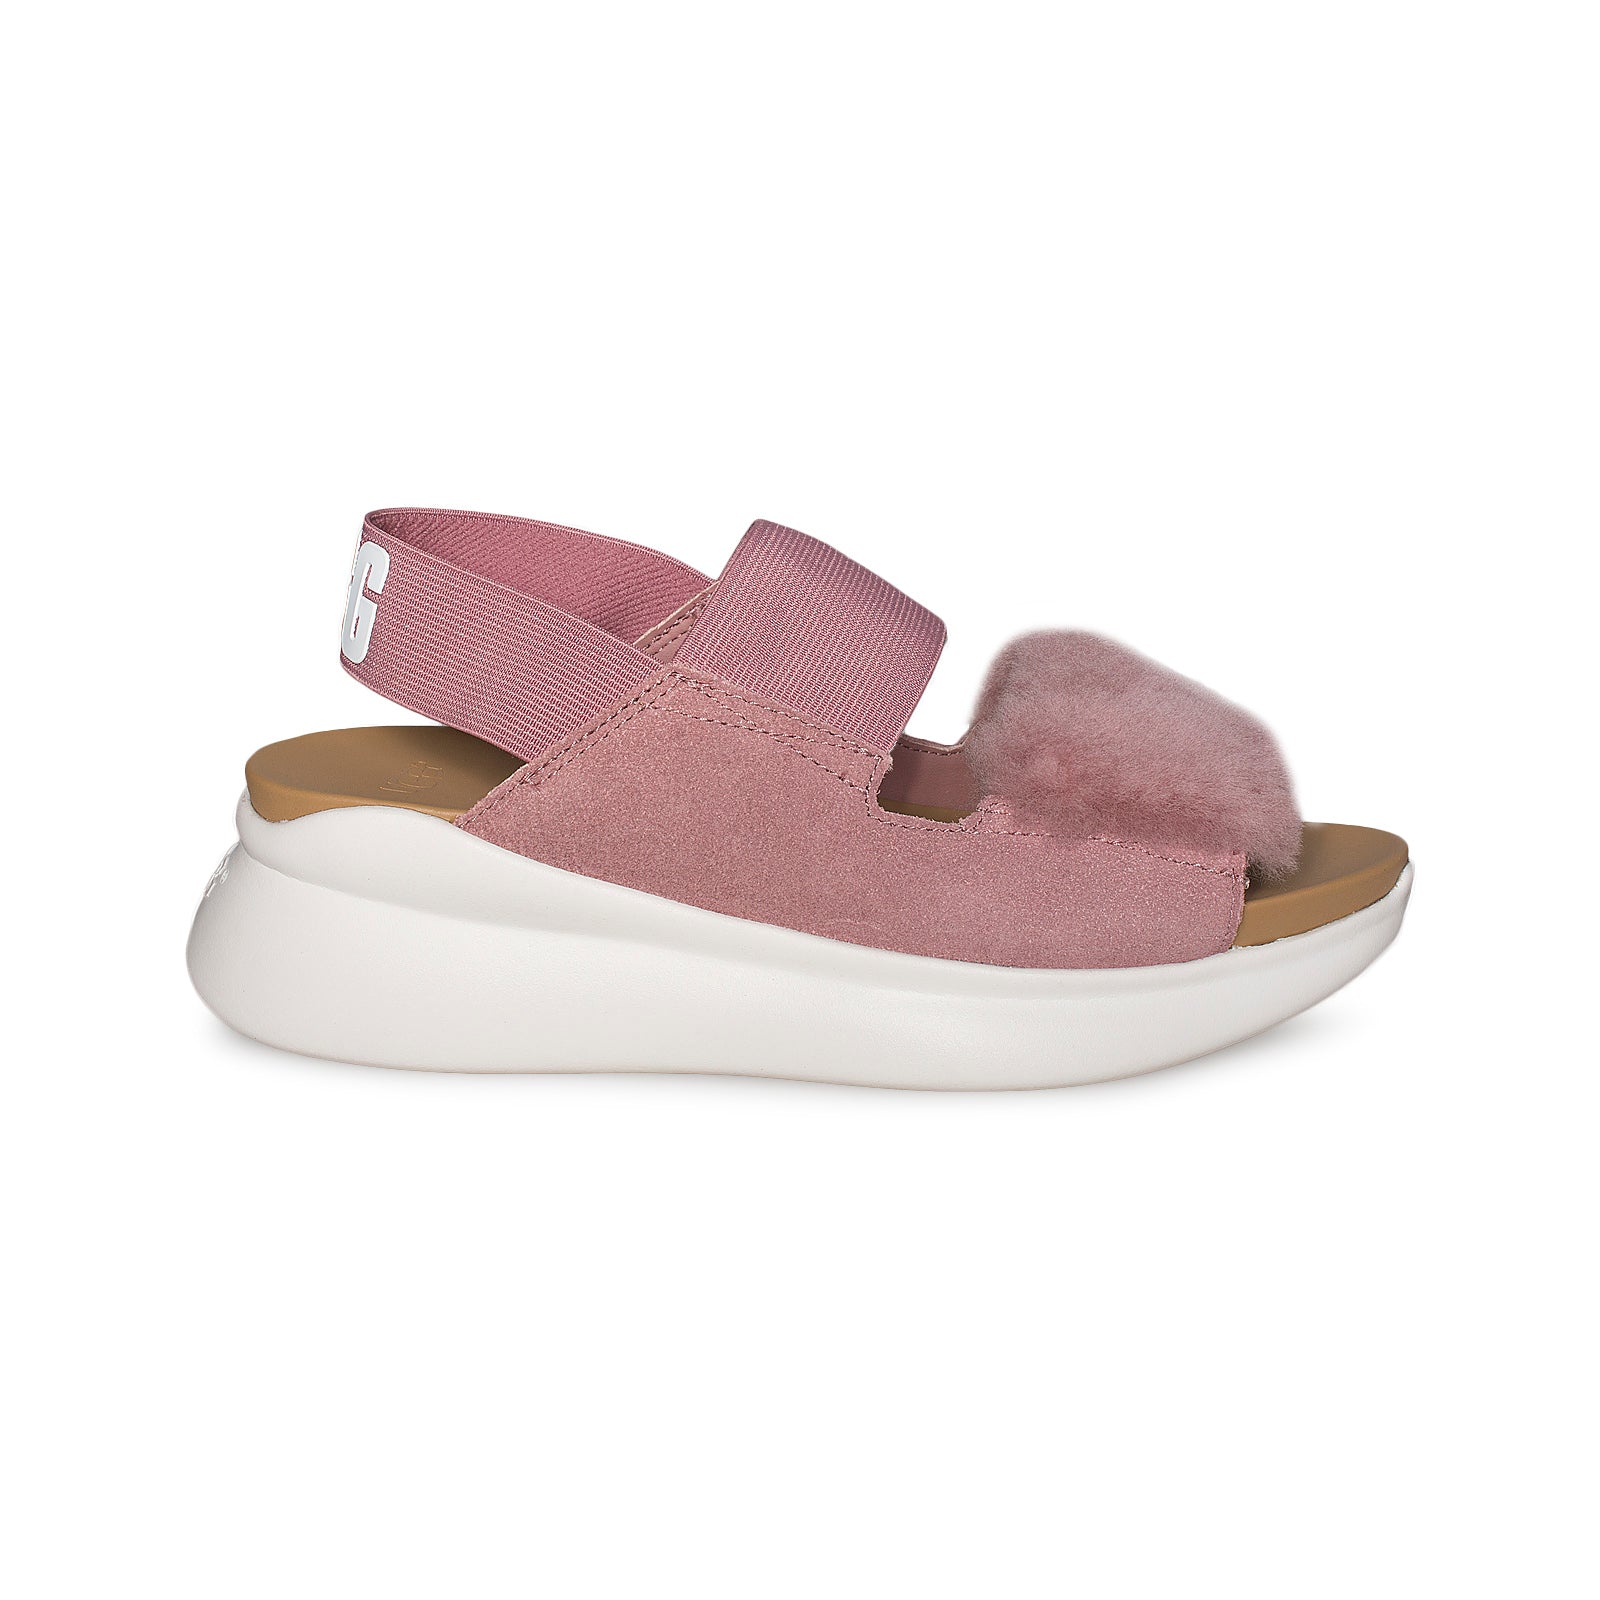 ugg slippers pink dawn